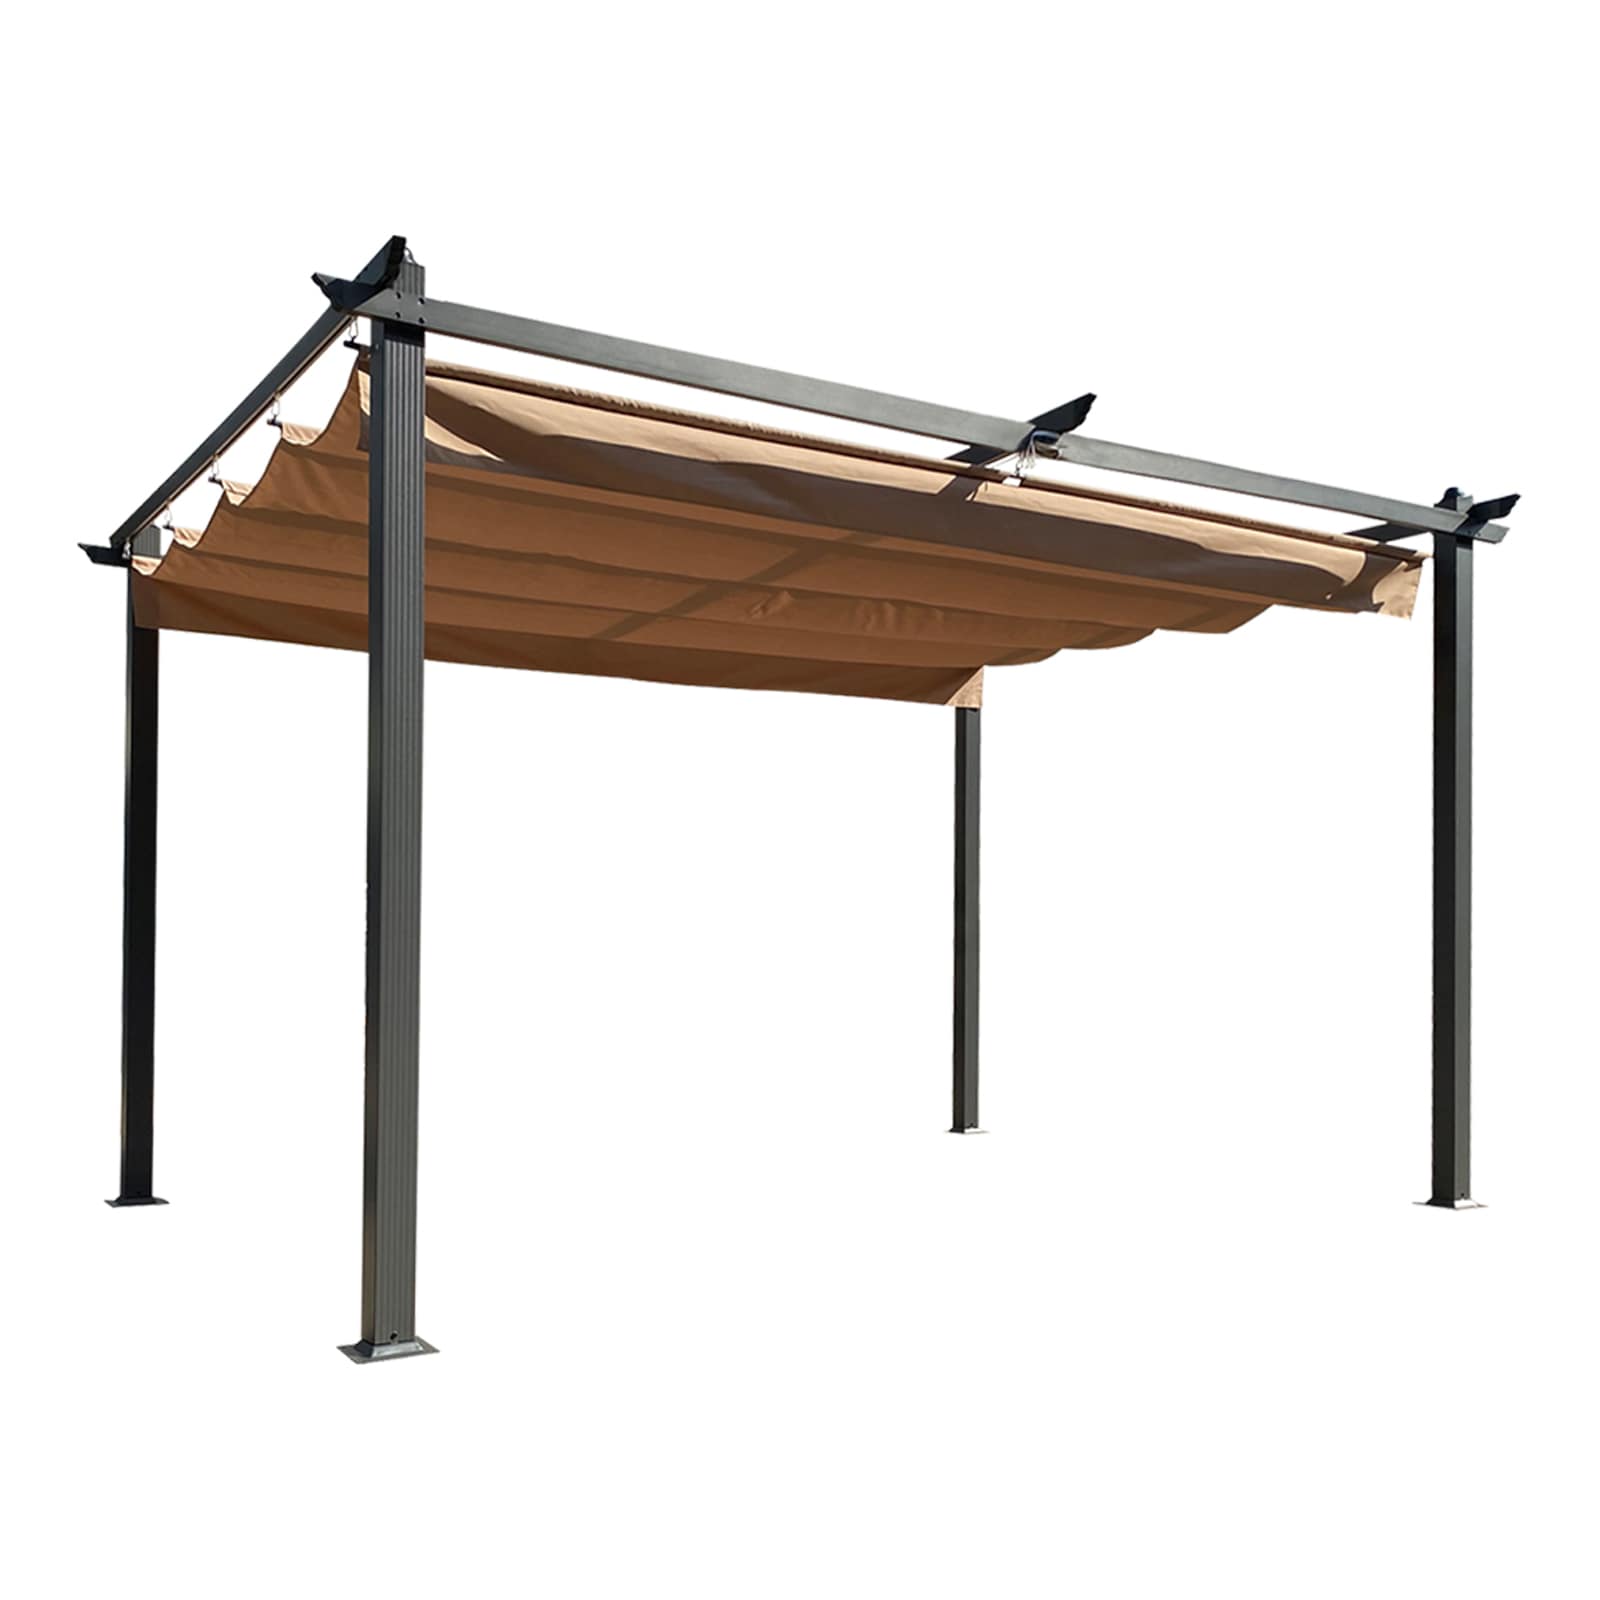 Canopy Sun shelter Pergola 10-ft W x 13-ft L x 7-ft 11-1/4-in H Beige Metal Freestanding Pergola with Canopy Polyester | - Maocao Hoom MZH67150